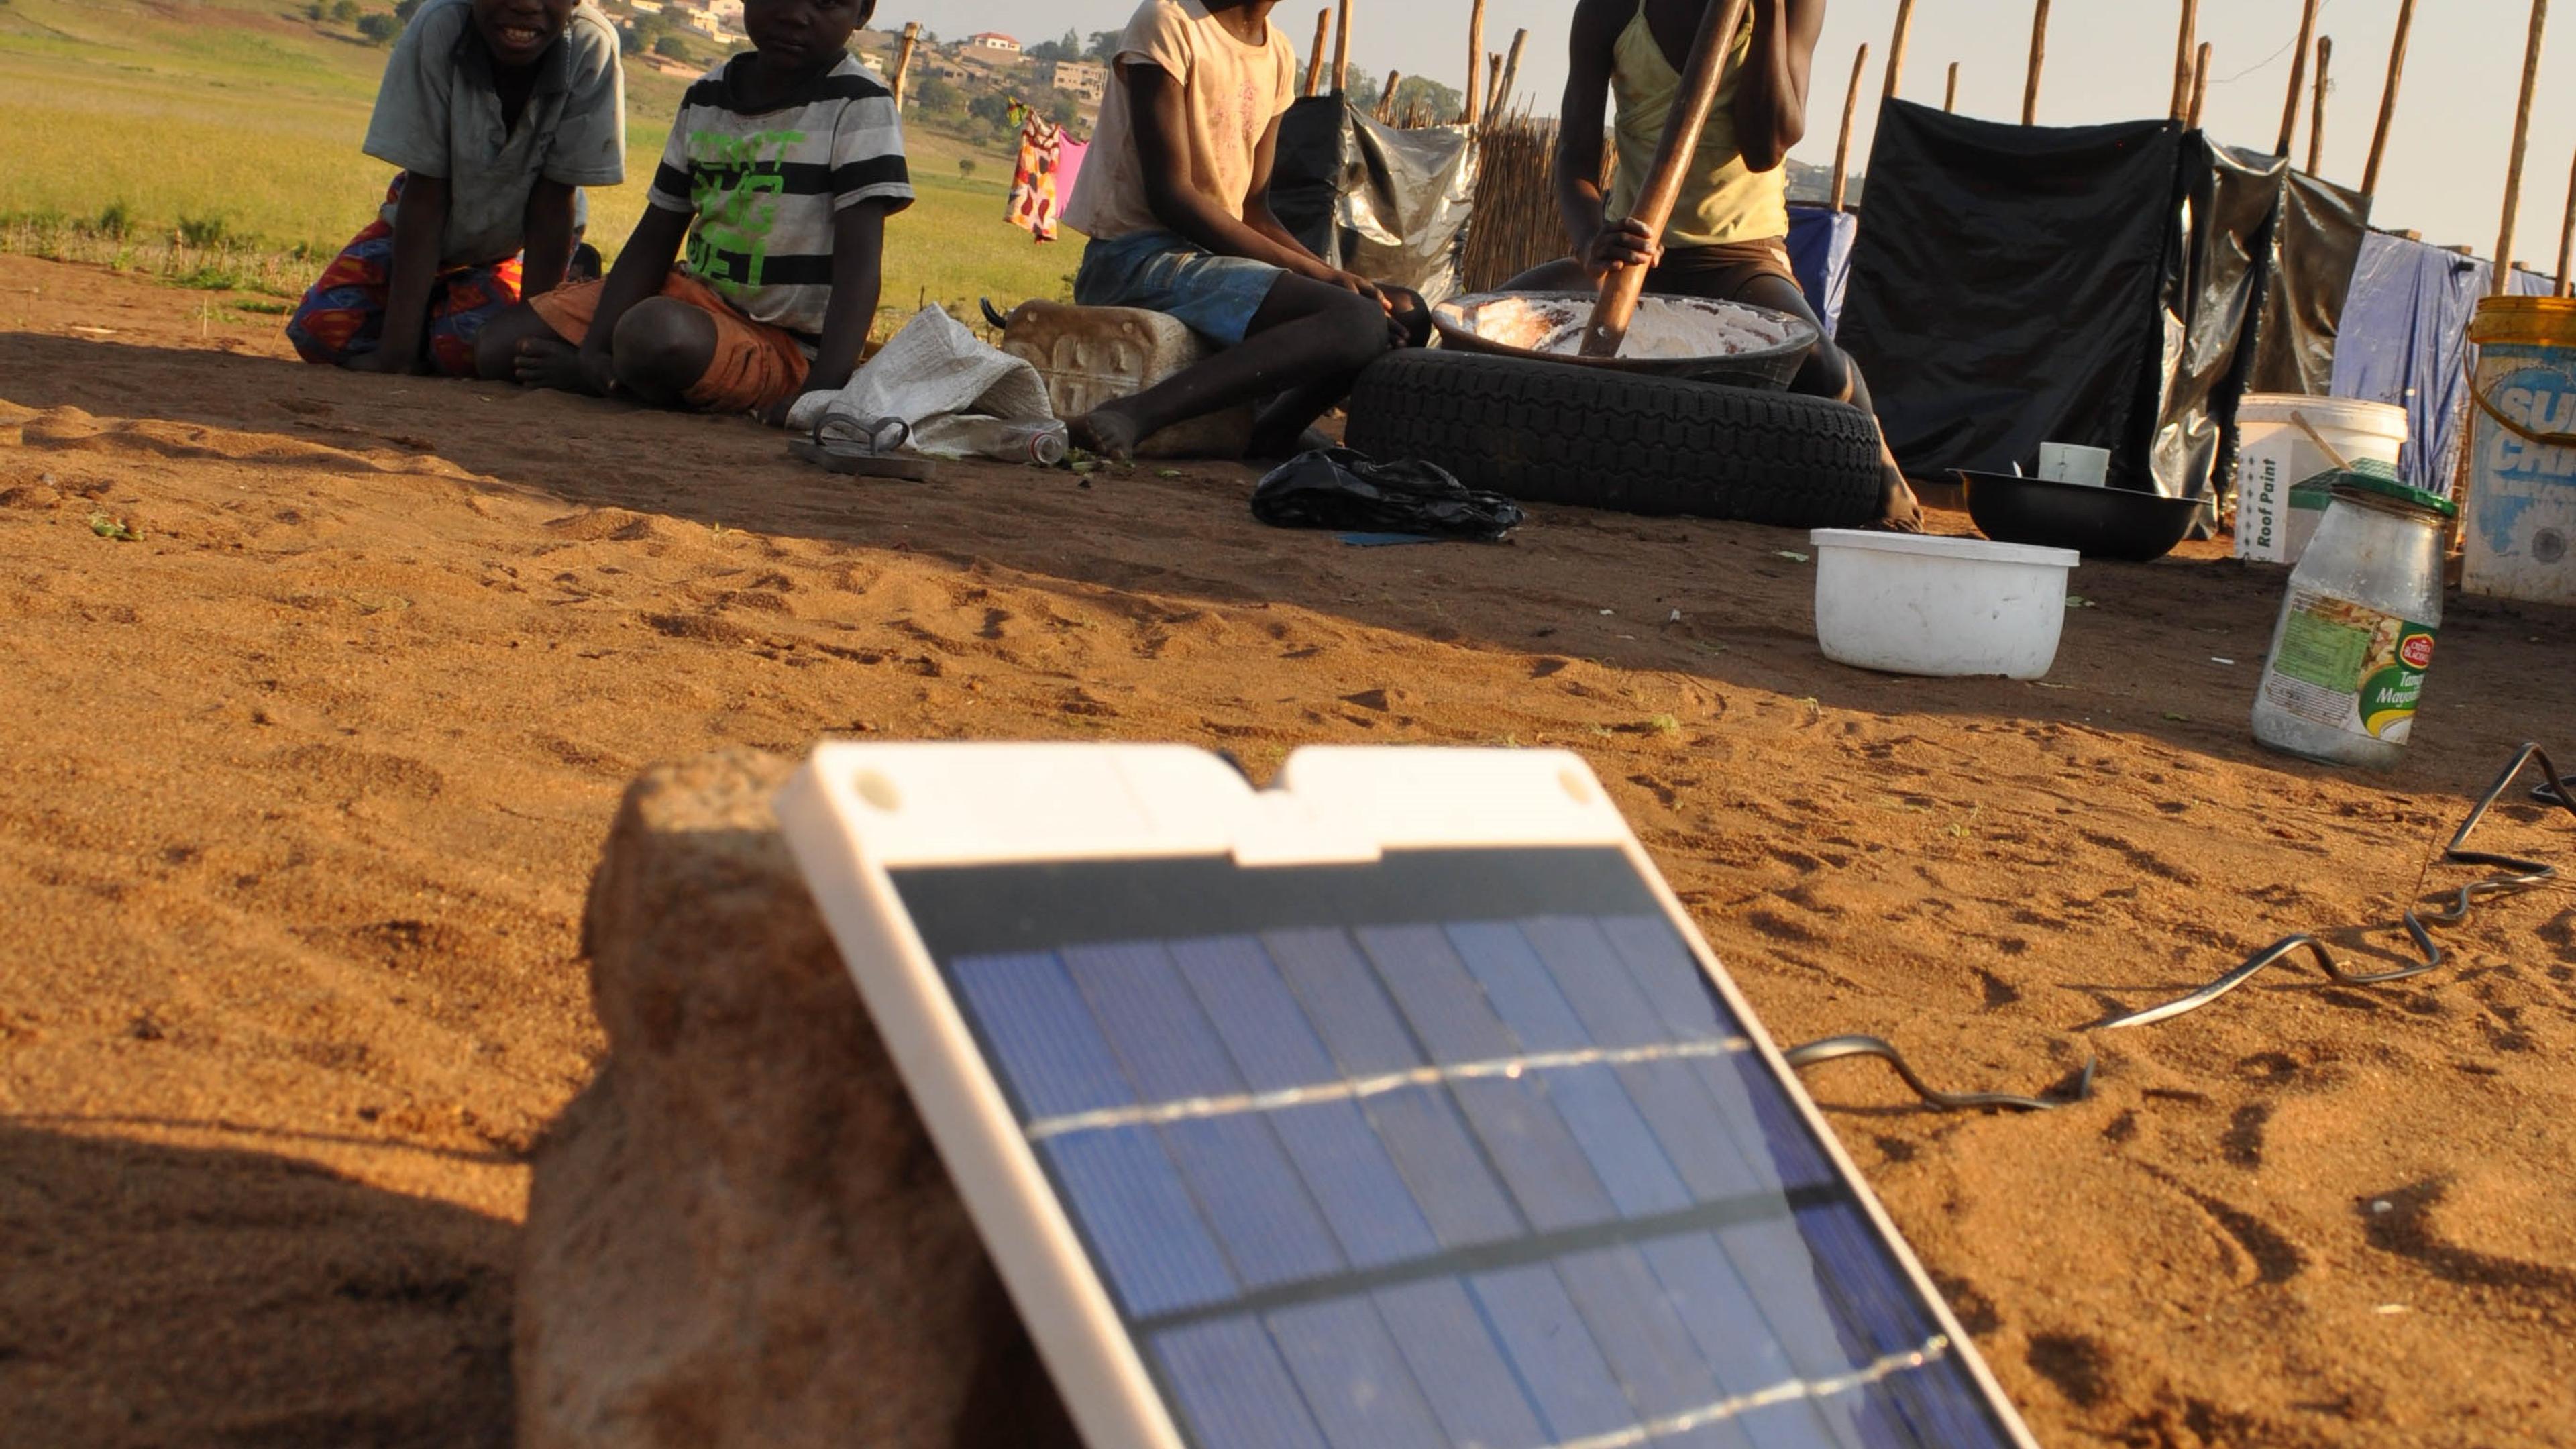 Solar cell energy in rural areas